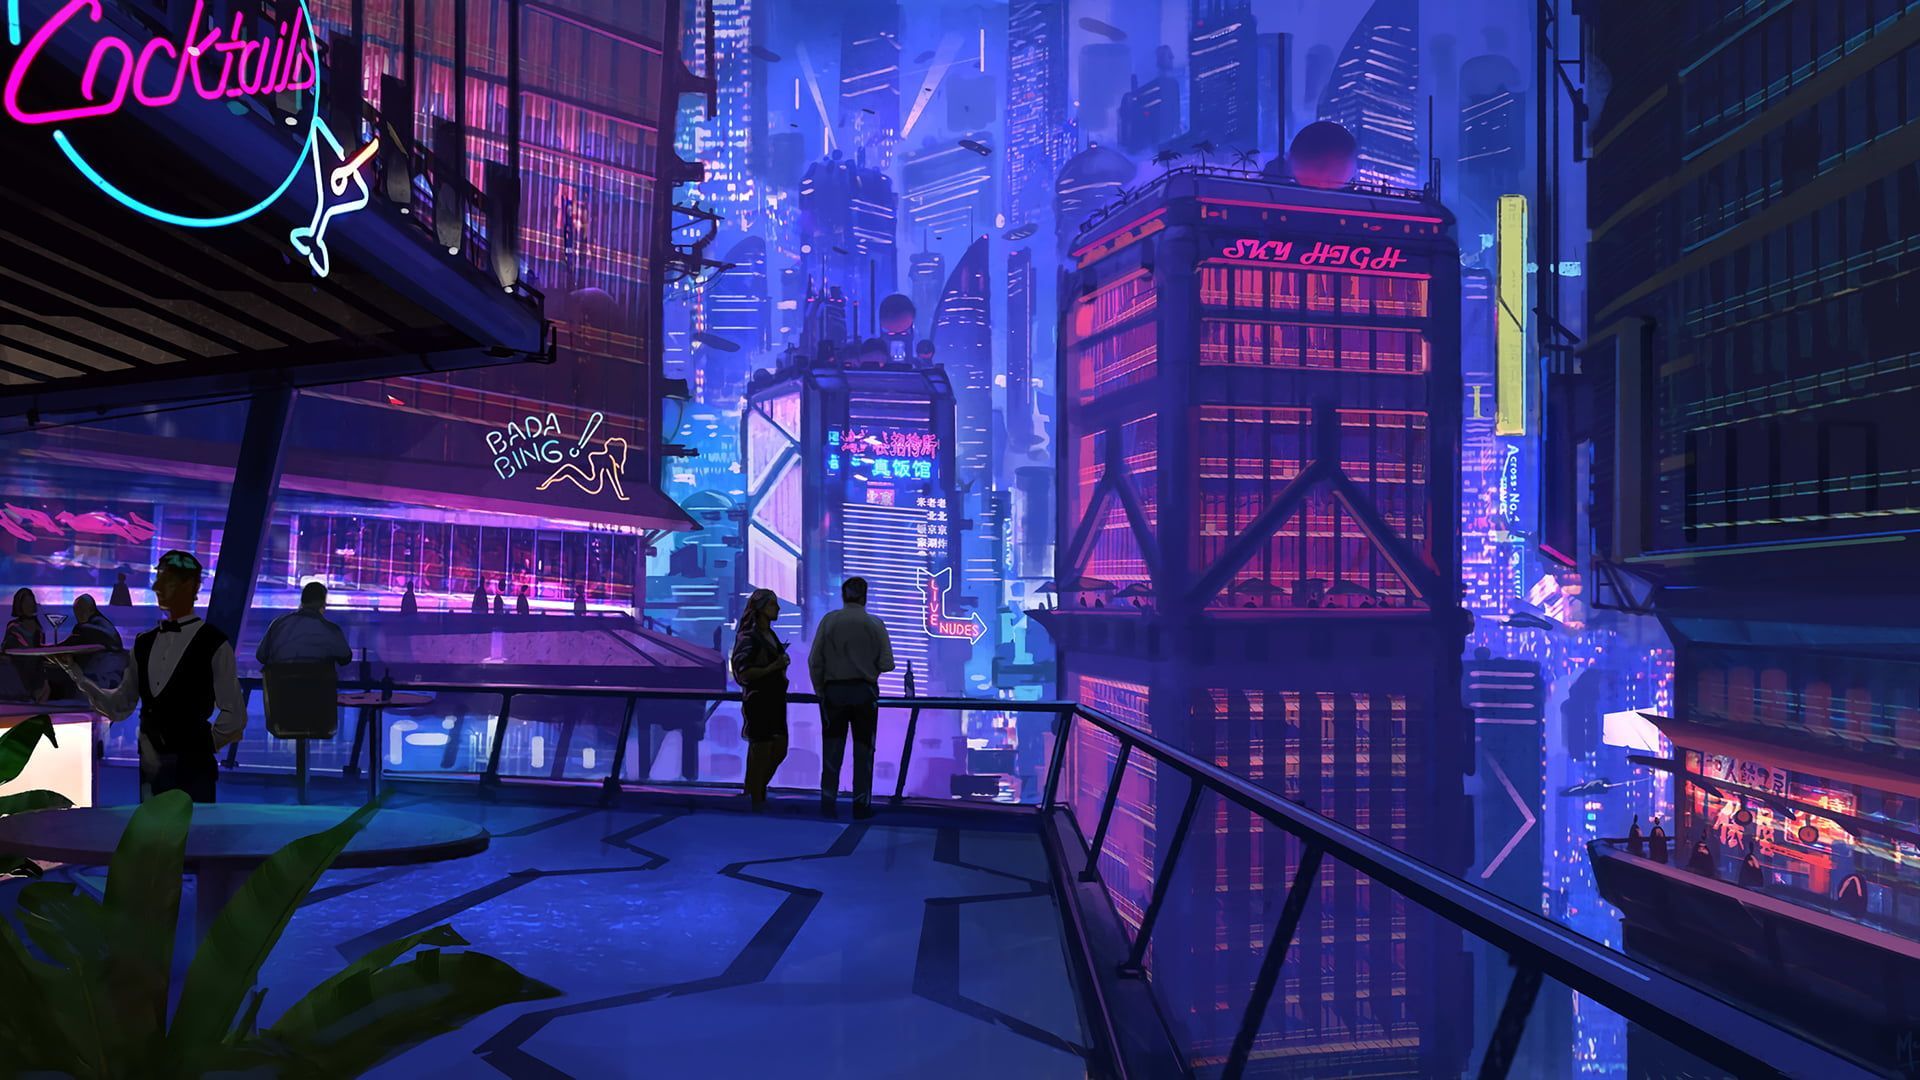 Pink and gray animated buildings illustration wallpaper, group of person standing in front of neon buildin. Cyberpunk city, Building illustration, Futuristic city